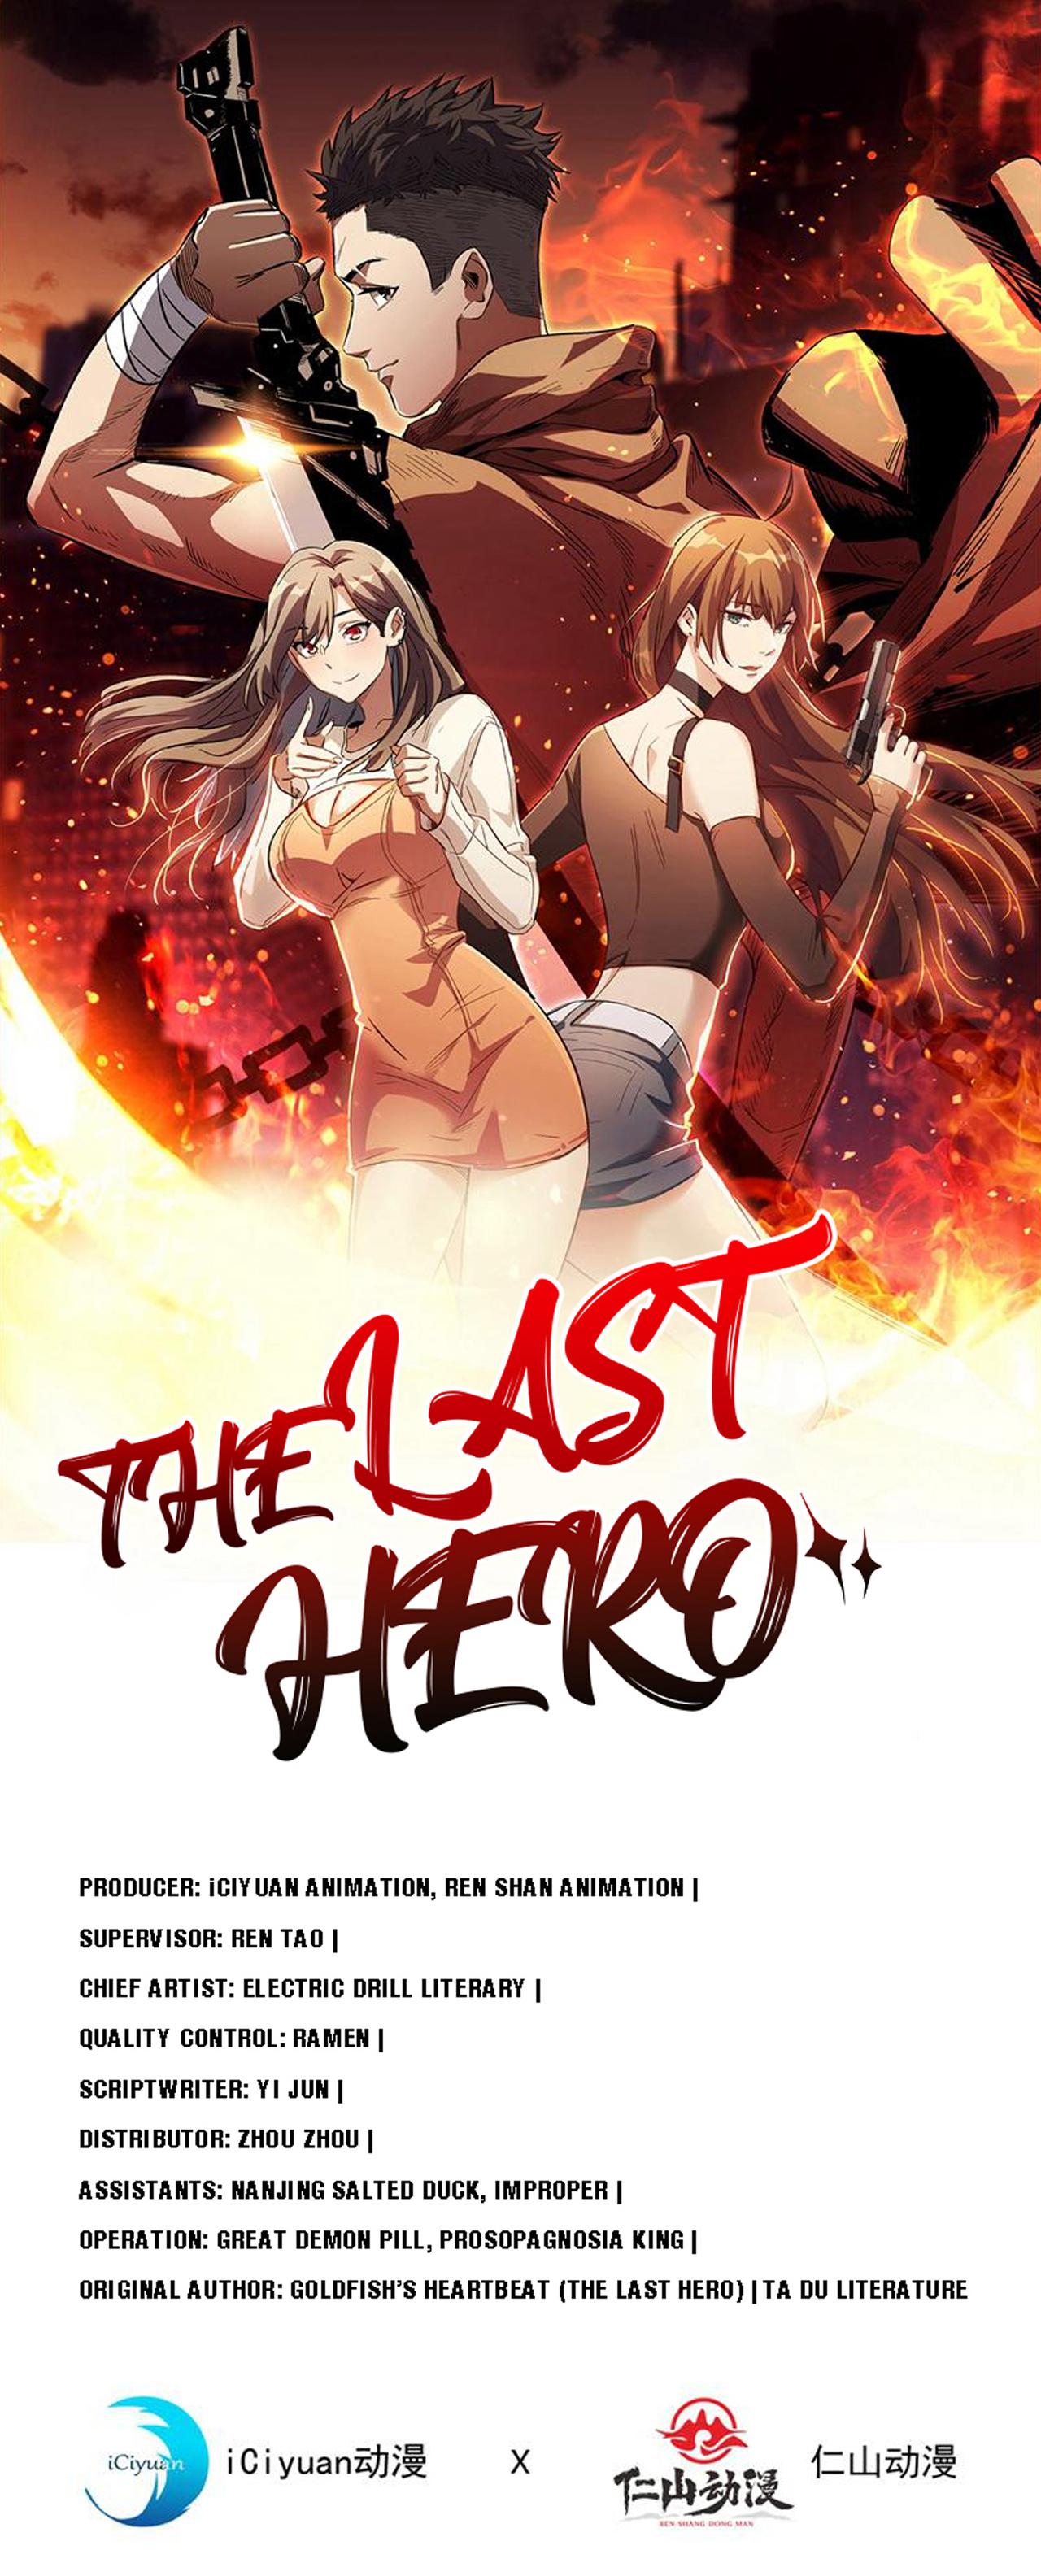 The Last Hero, I Am Picking up Attributes and Items in Last Days 113